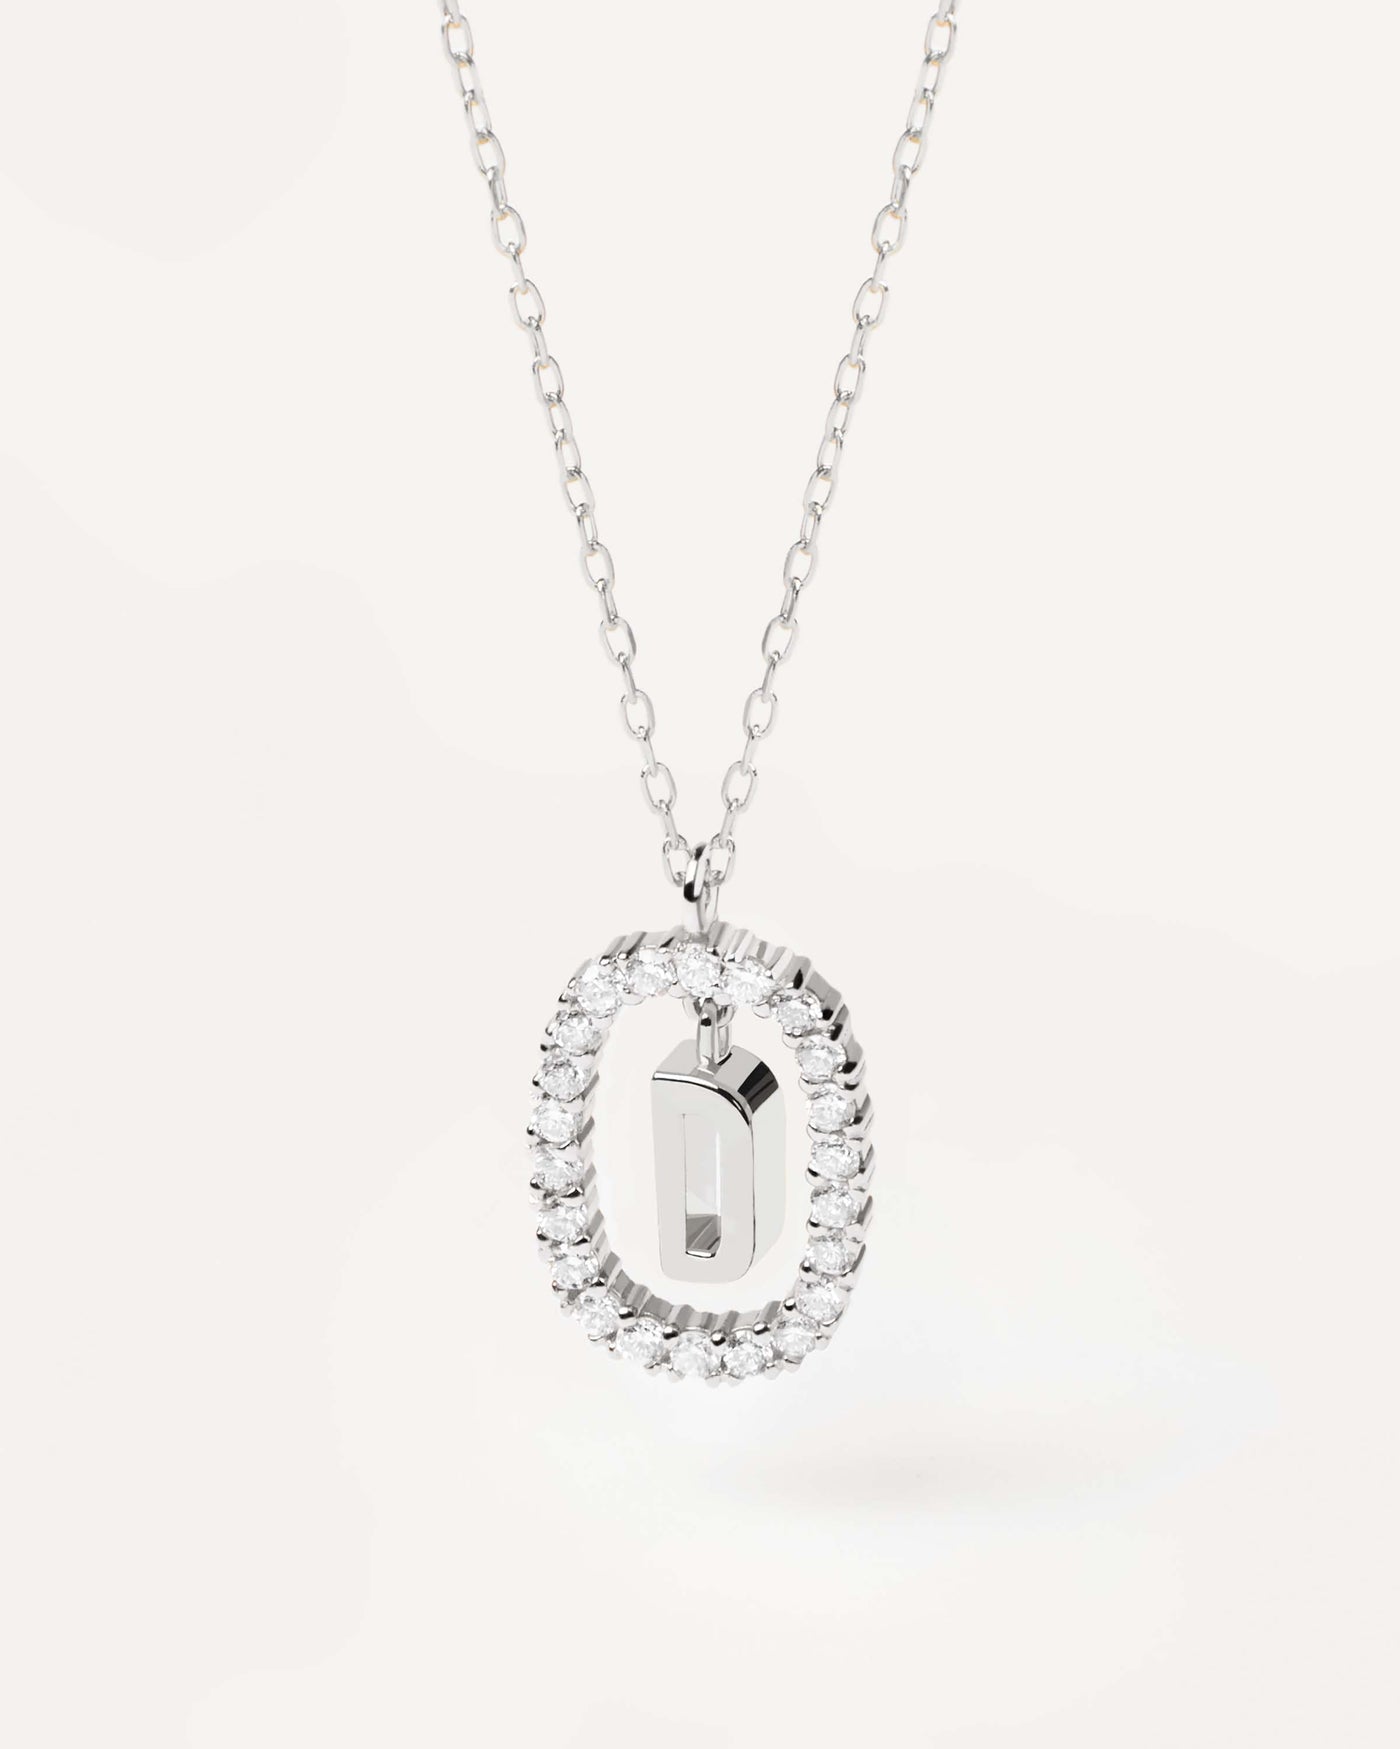 2023 Selection | Diamonds and White Gold Letter D Necklace. Initial D necklace in solid white gold, circled by 0.33 carats lab-grown diamonds. Get the latest arrival from PDPAOLA. Place your order safely and get this Best Seller. Free Shipping.